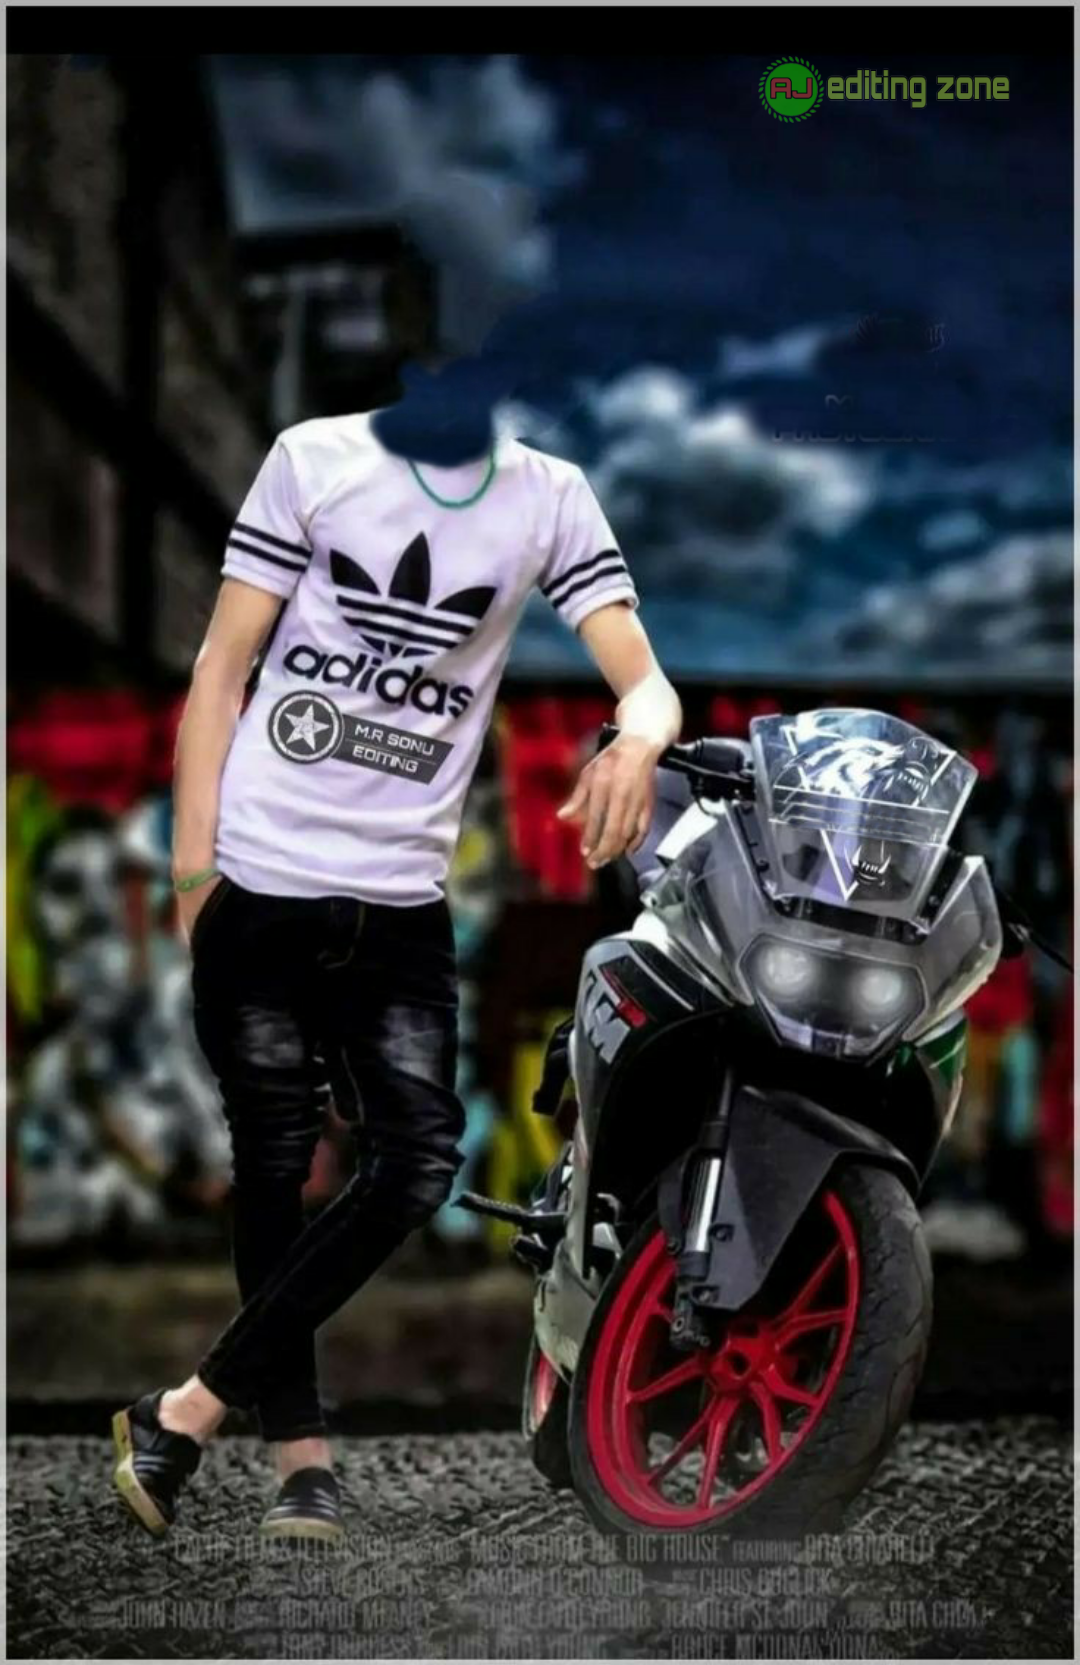 Ktm Bike Photo Editing Cb Backgrounds for Boys | Bike Photo Photo Shoot Poses Without Face for Editing | aj editing zone